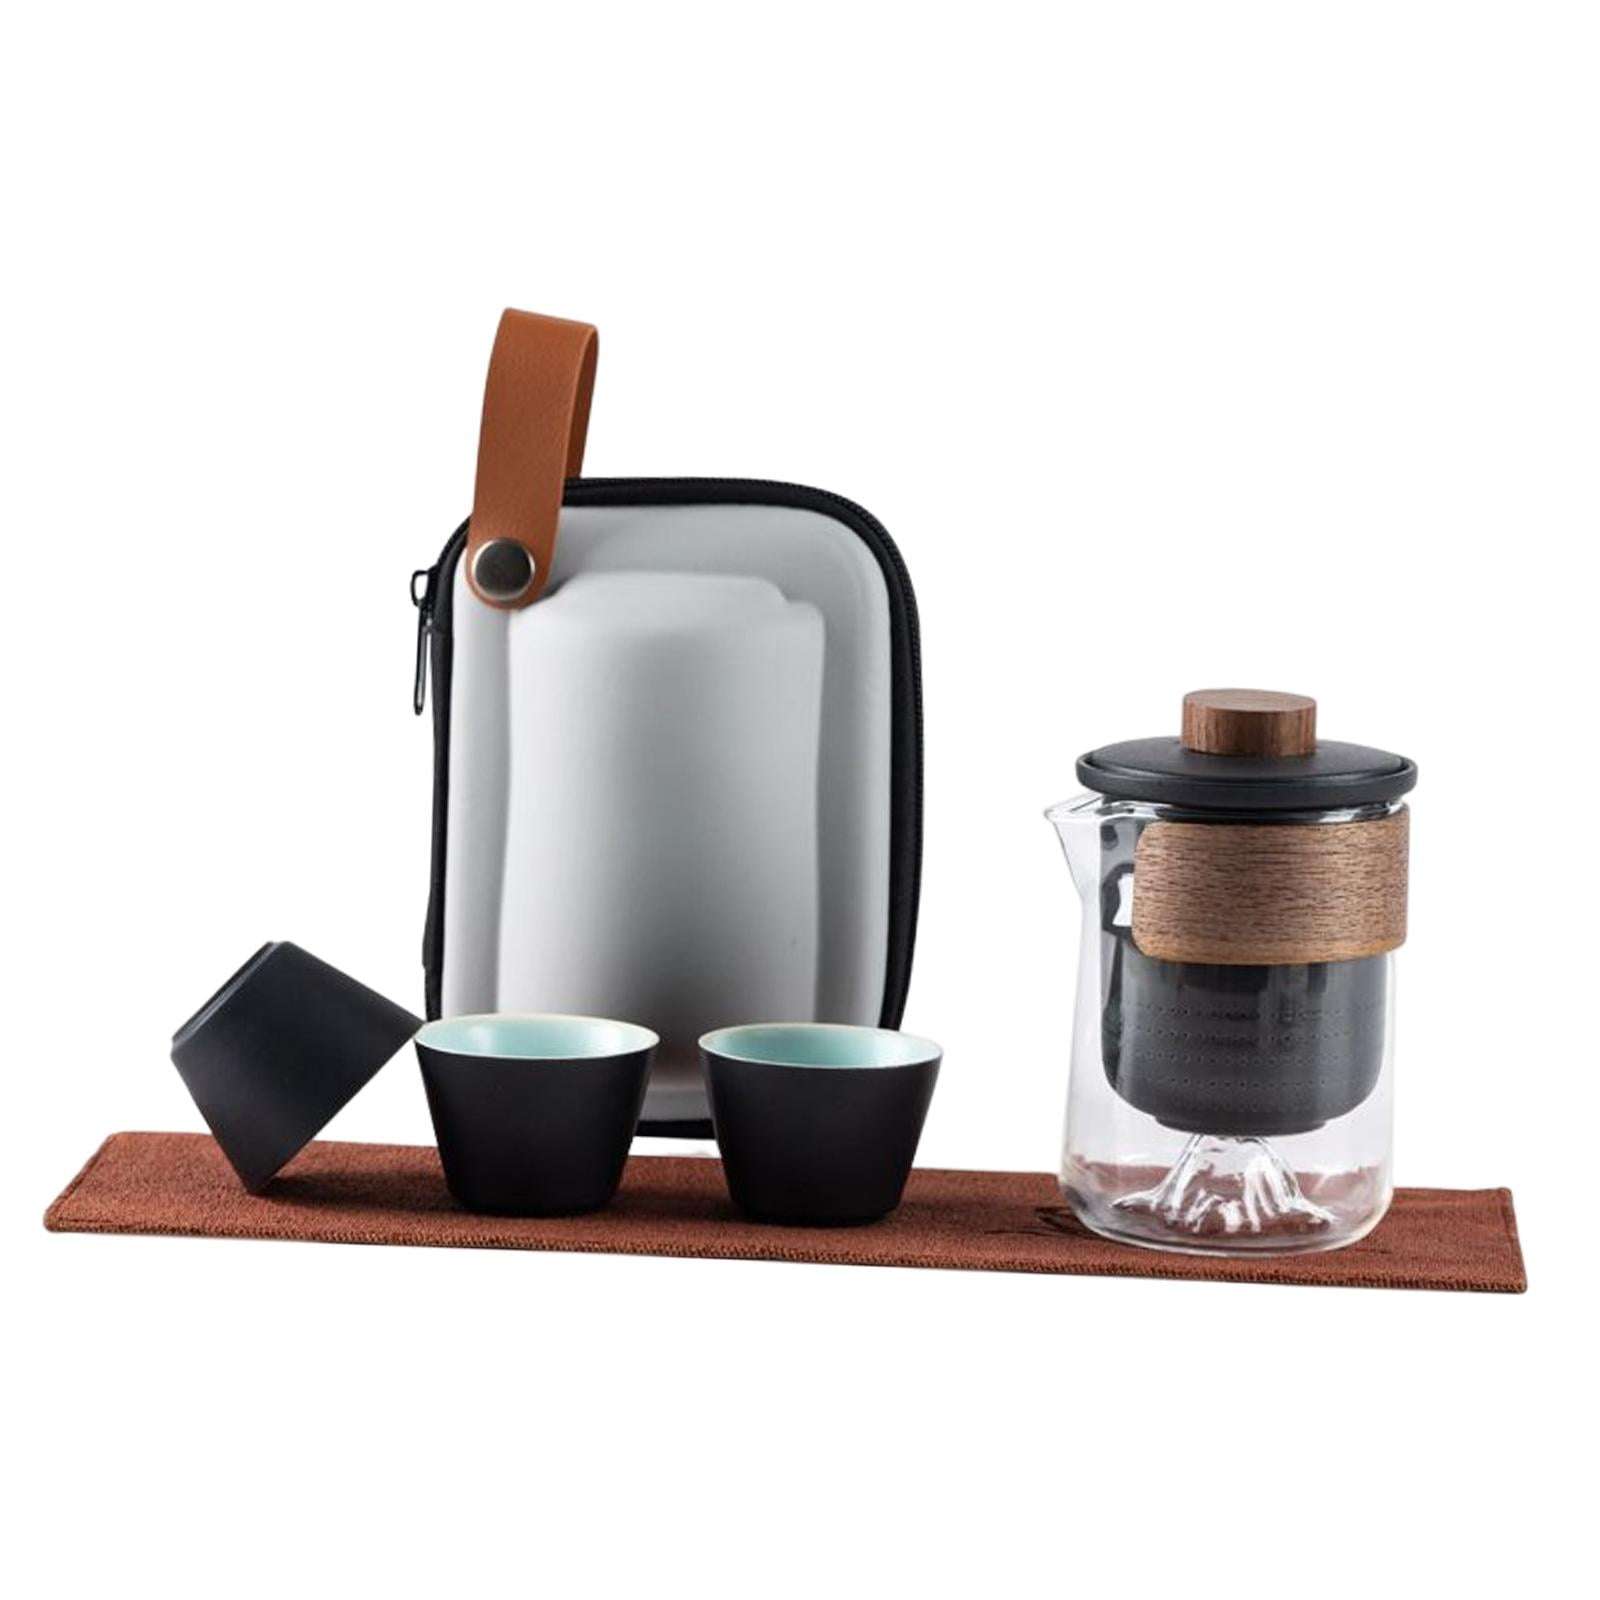 Travel Tea Set,Portable TeaSet,Chinese Tea Set,Ceramic Mini Gongfu Teapot  with 3 Teacupsfor Travel Home Outdoor and Office.(Black)